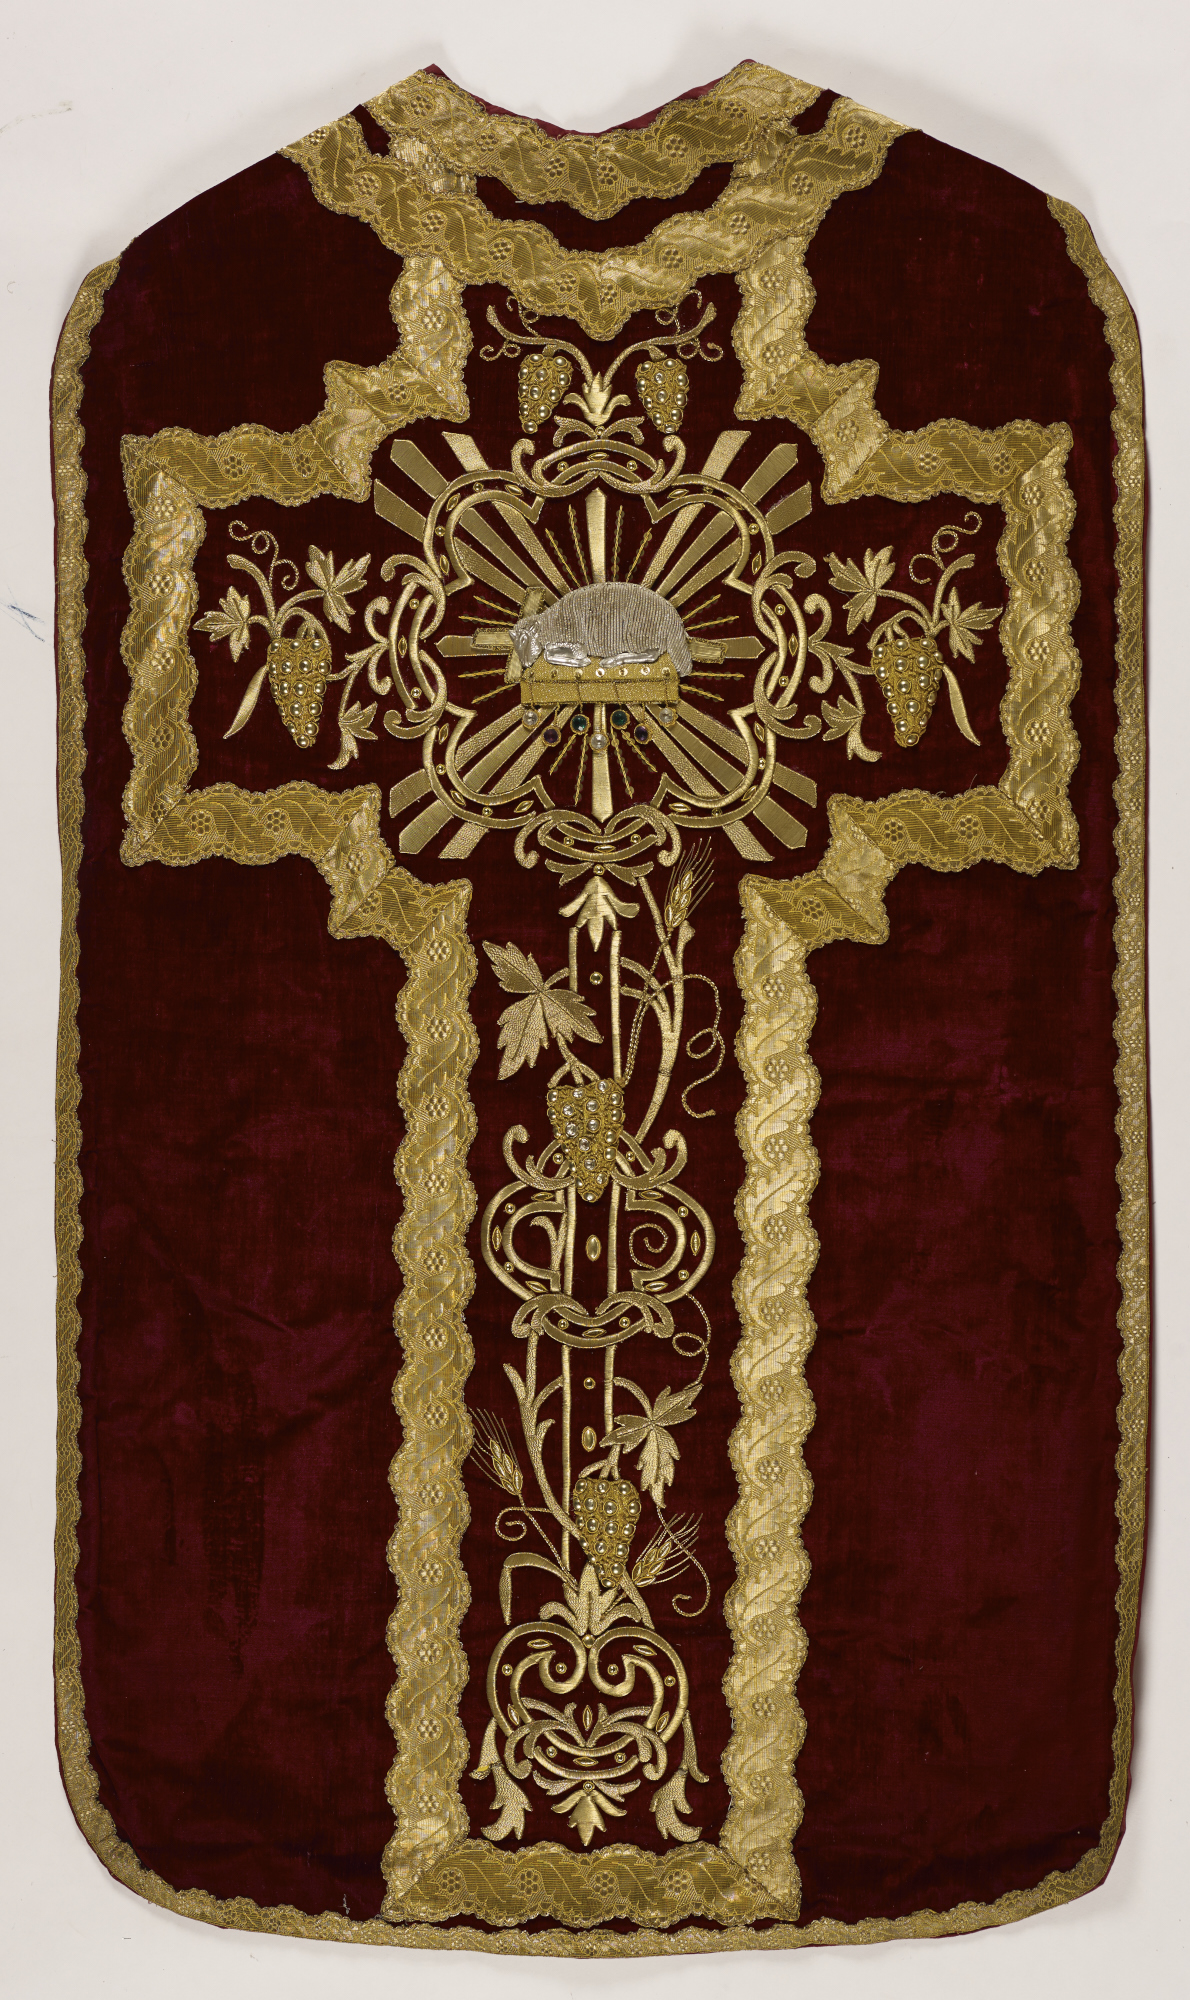 chasuble rouge